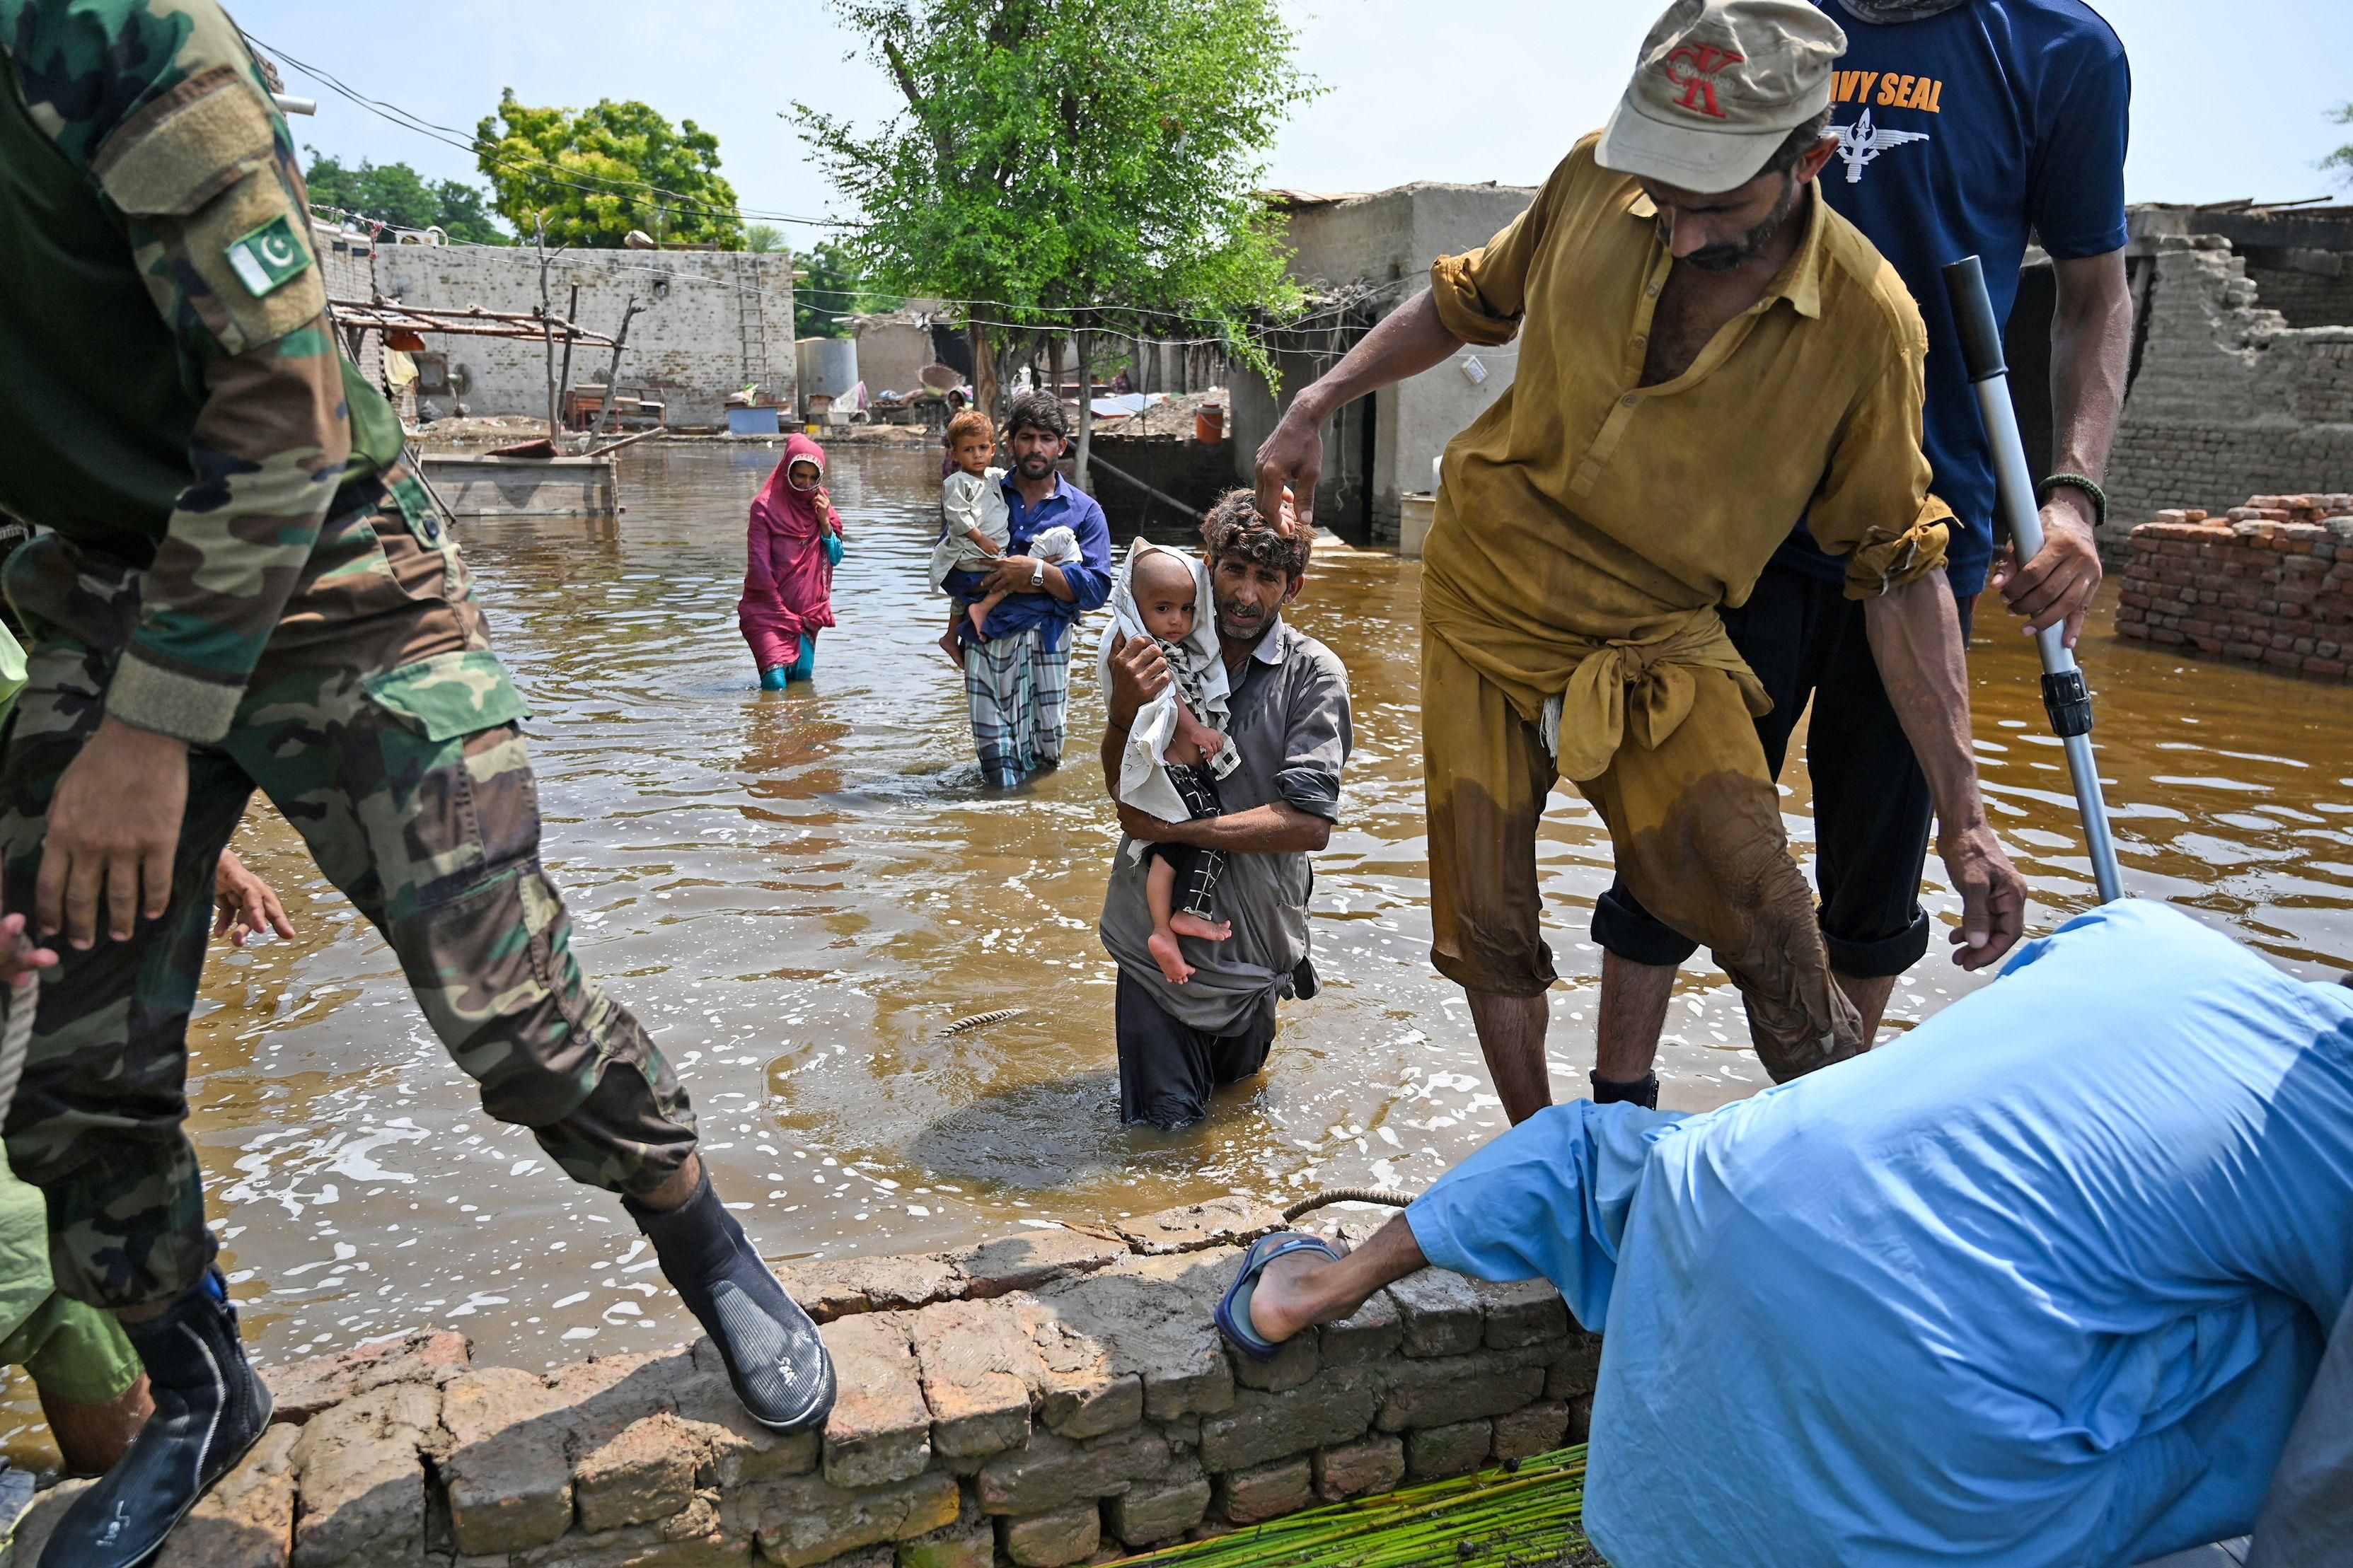 People impacted by flooding in Pakistan flee their damaged homes